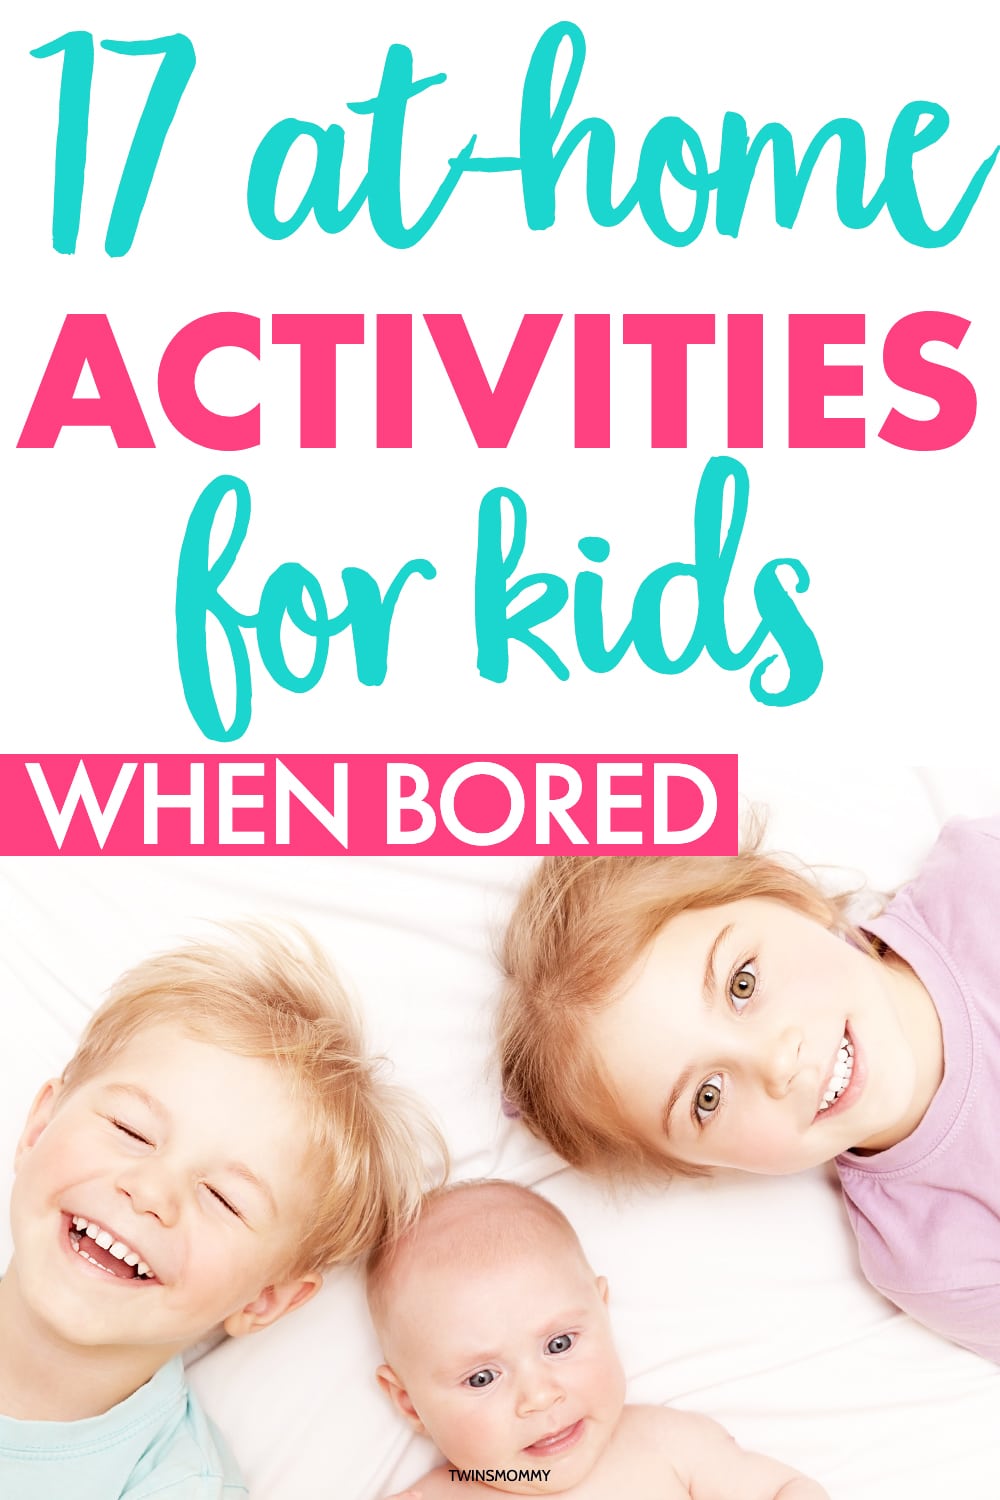 55 Things to Do When You're Bored - Activities for Kids - Twins Mommy